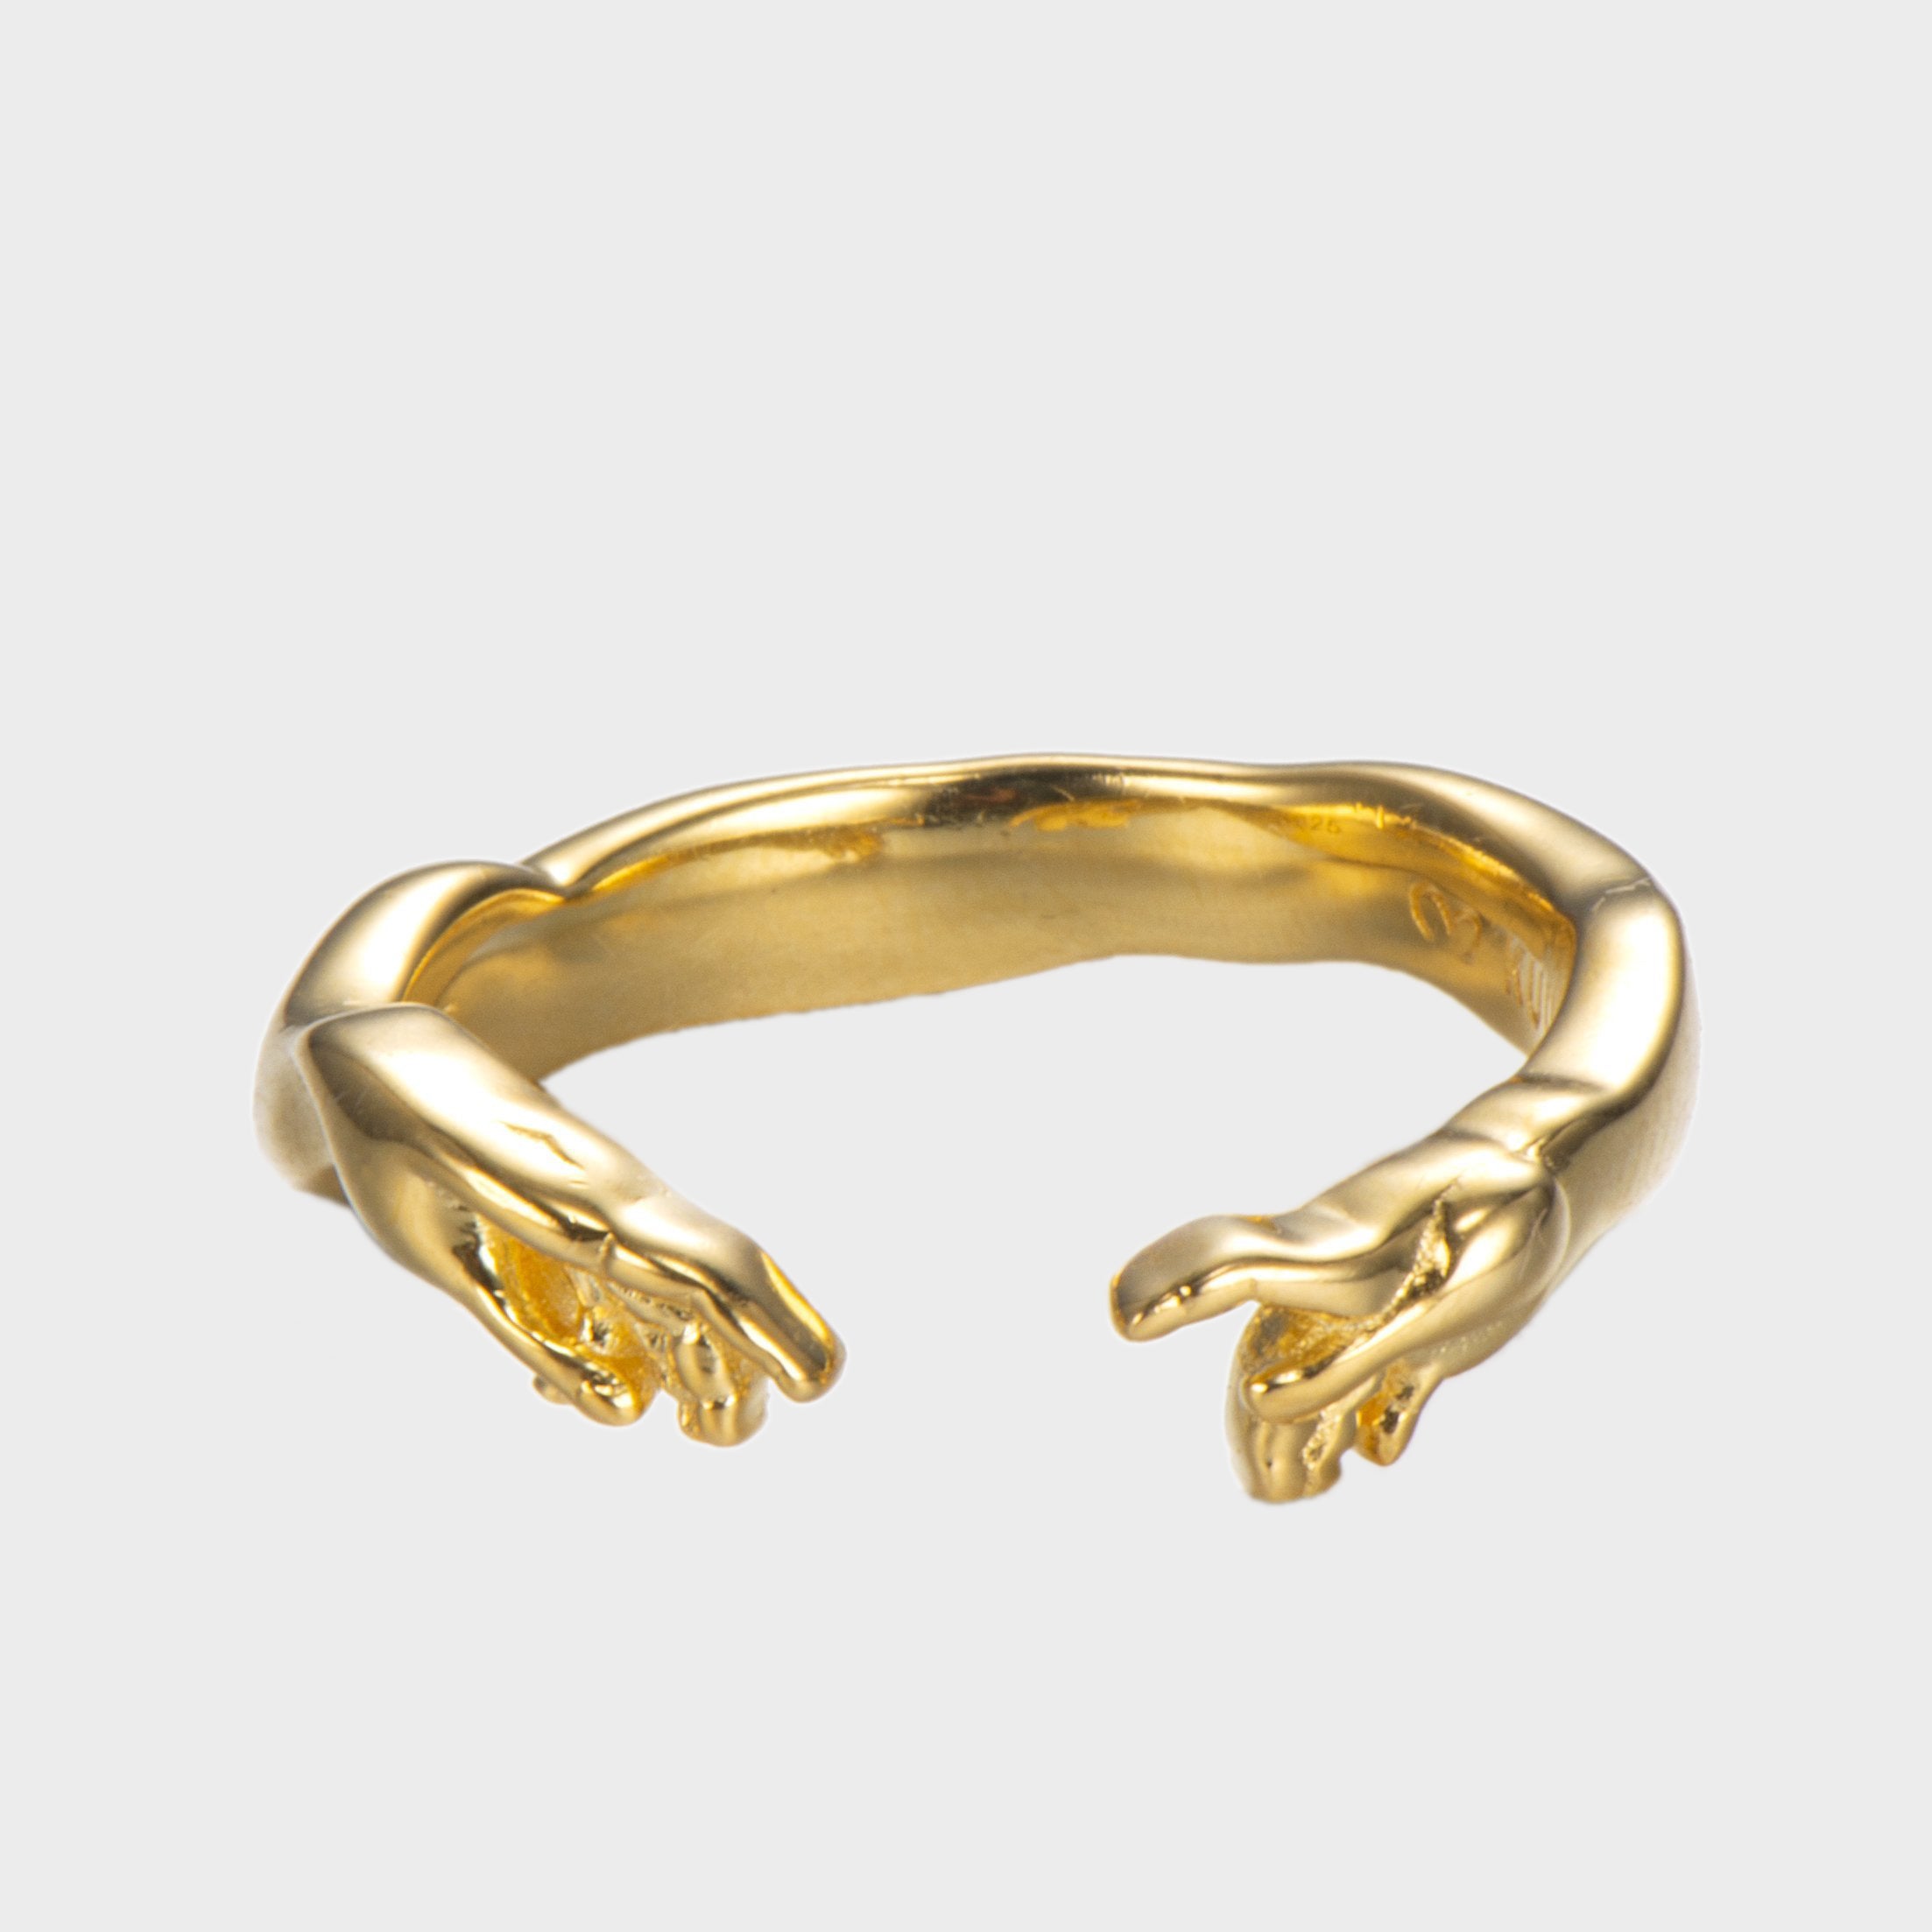 The creation of Adam - Ring Gold